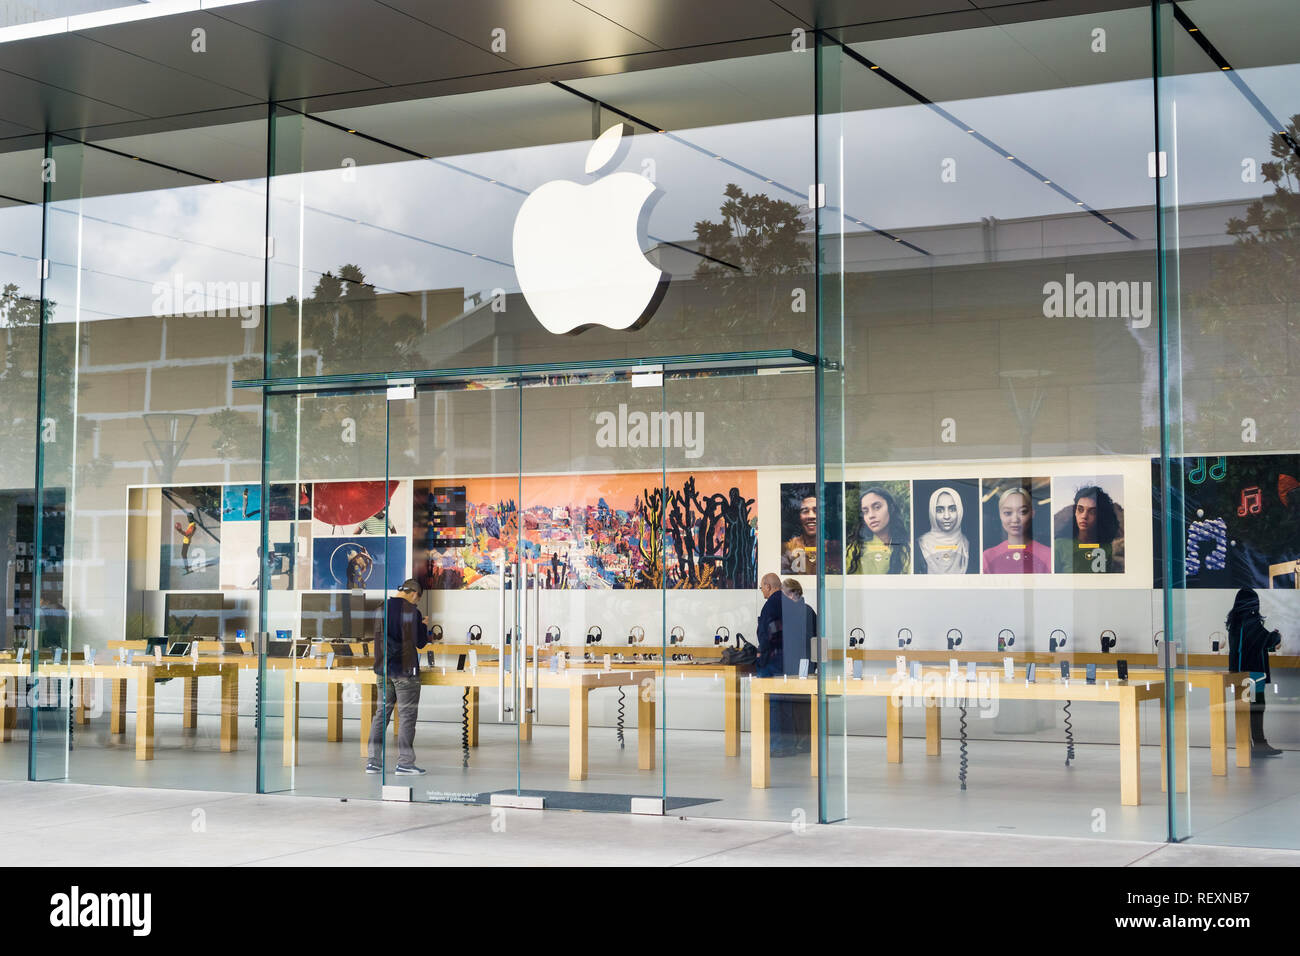 January 11, 2018 Palo Alto / CA / USA - Apple store located at the open air Stanford shopping center Stock Photo